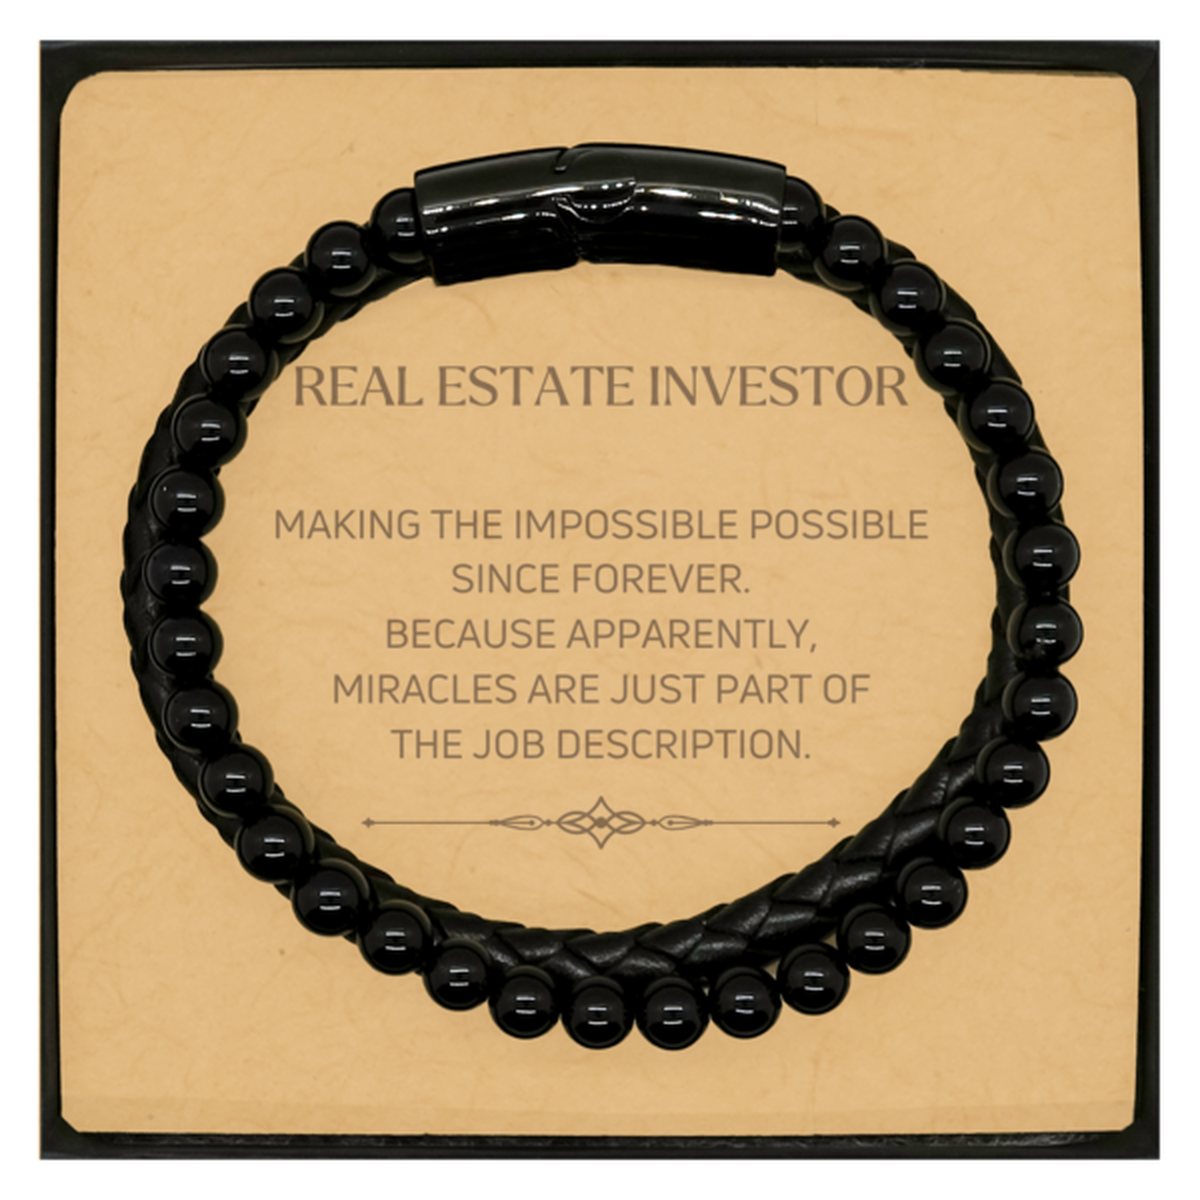 Funny Real Estate Investor Gifts, Miracles are just part of the job description, Inspirational Birthday Christmas Stone Leather Bracelets For Real Estate Investor, Men, Women, Coworkers, Friends, Boss